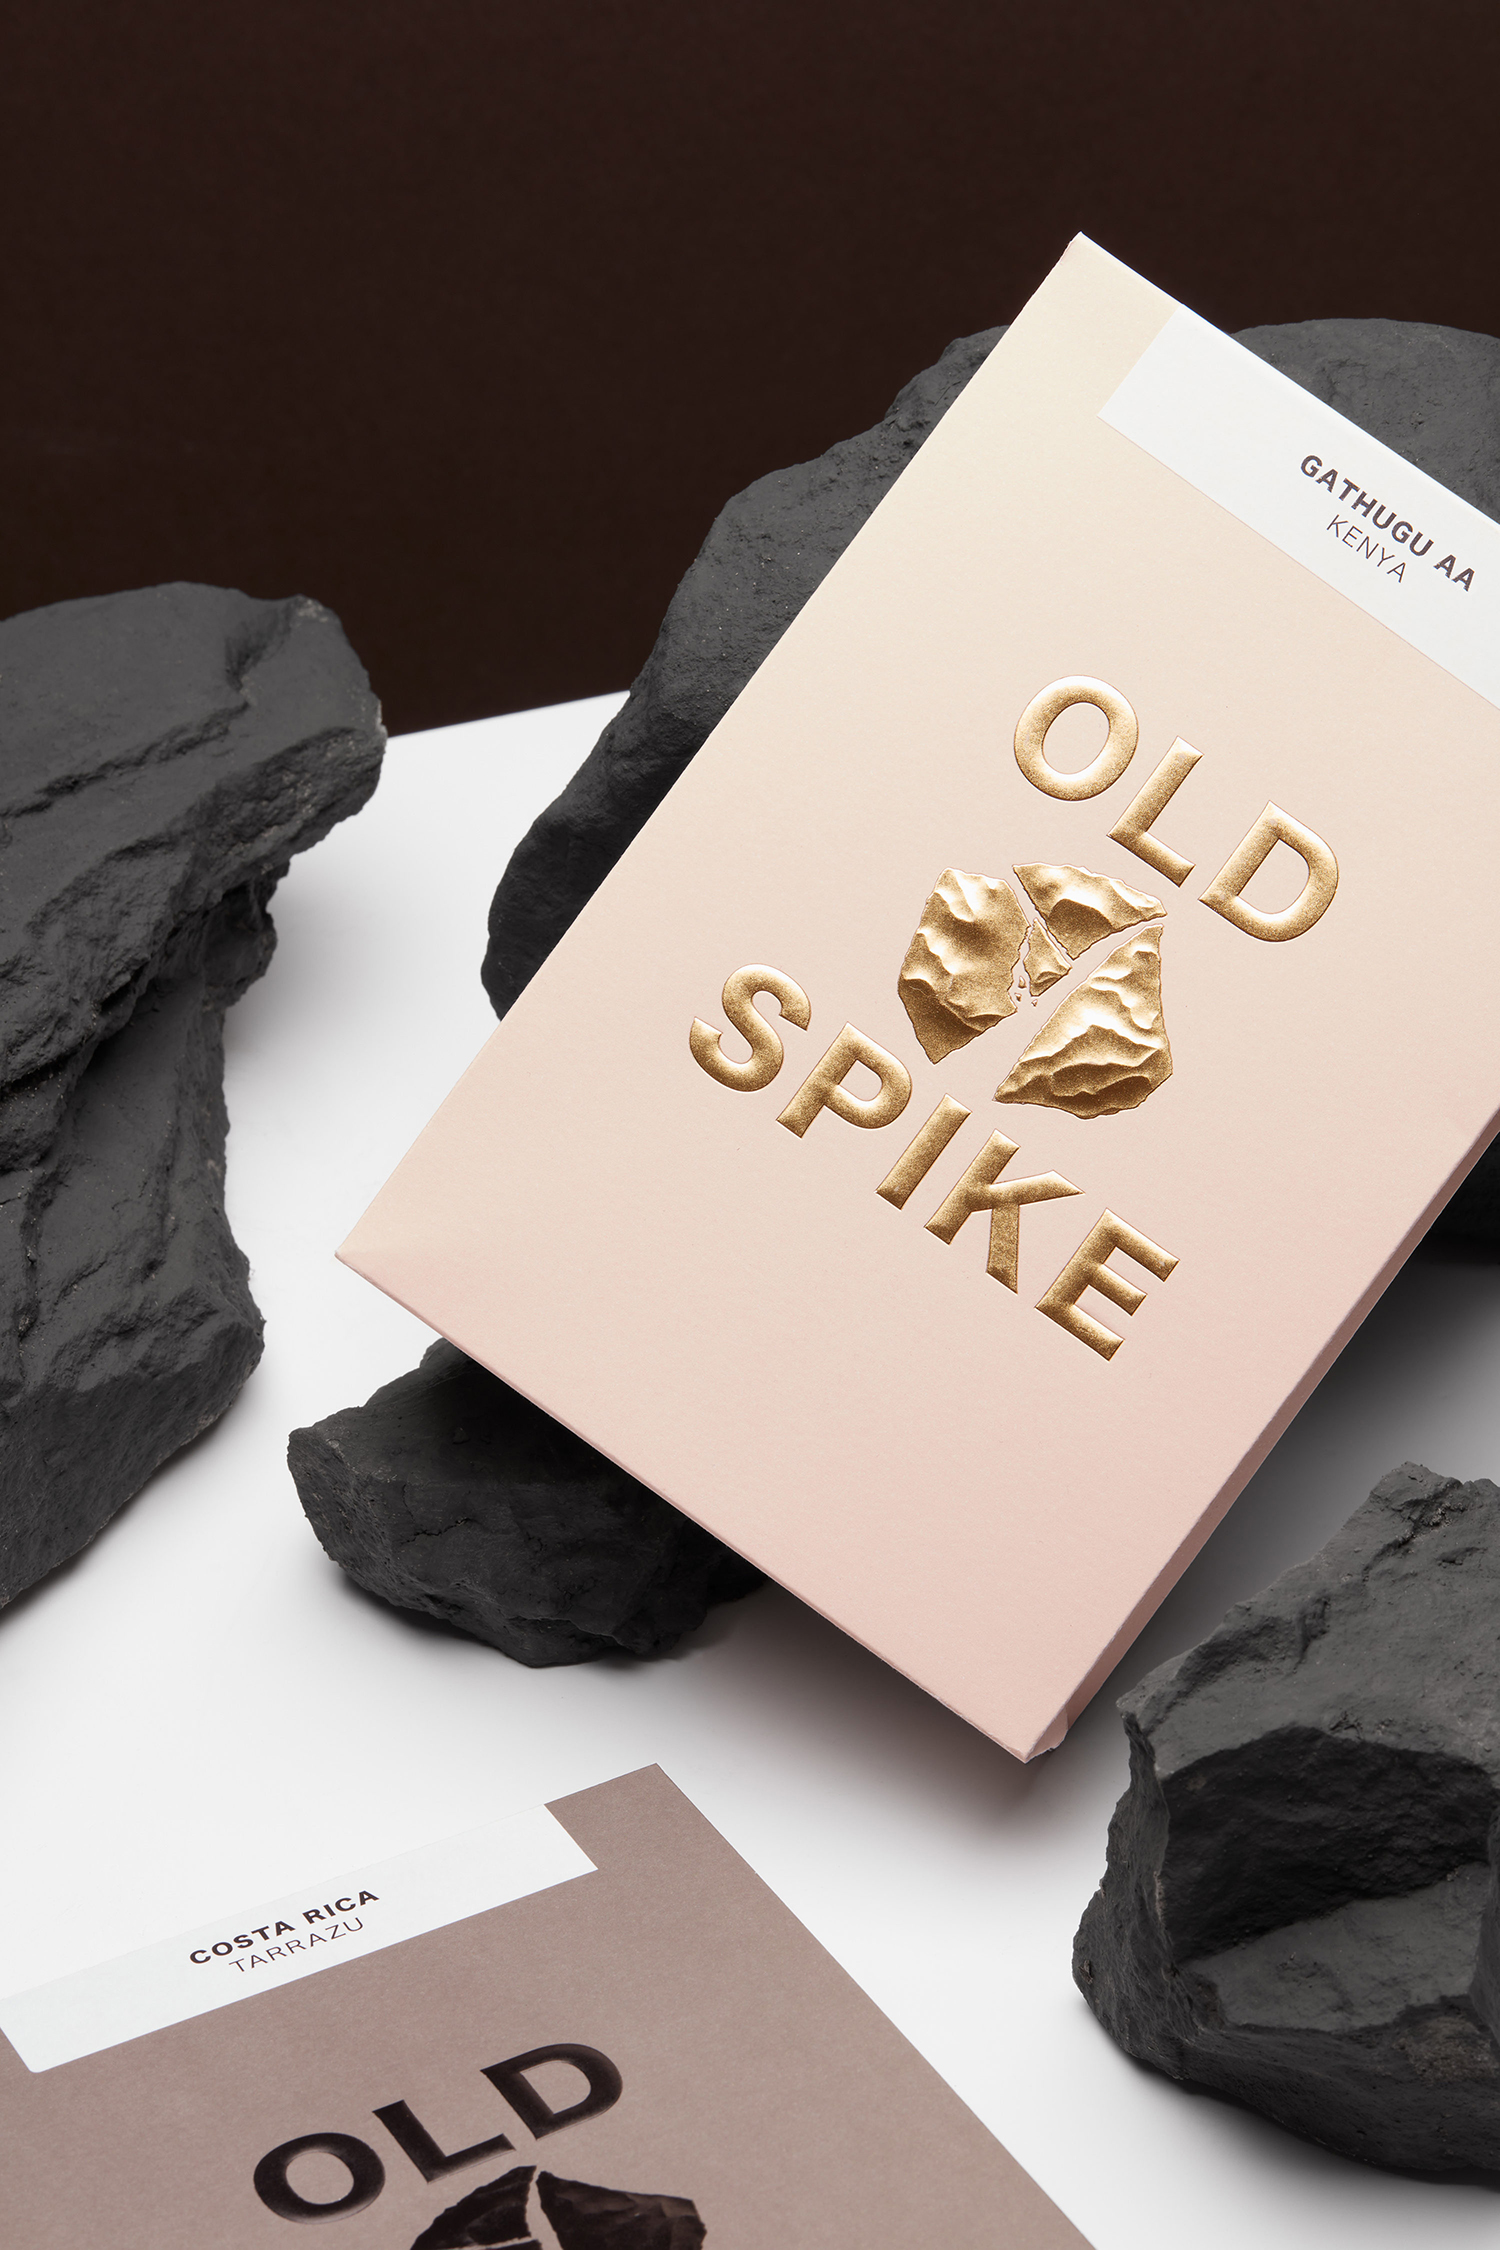 Coffee packaging design with a gold sculpted foil emboss designed by Commission Studio for London-based coffee roaster Old Spike